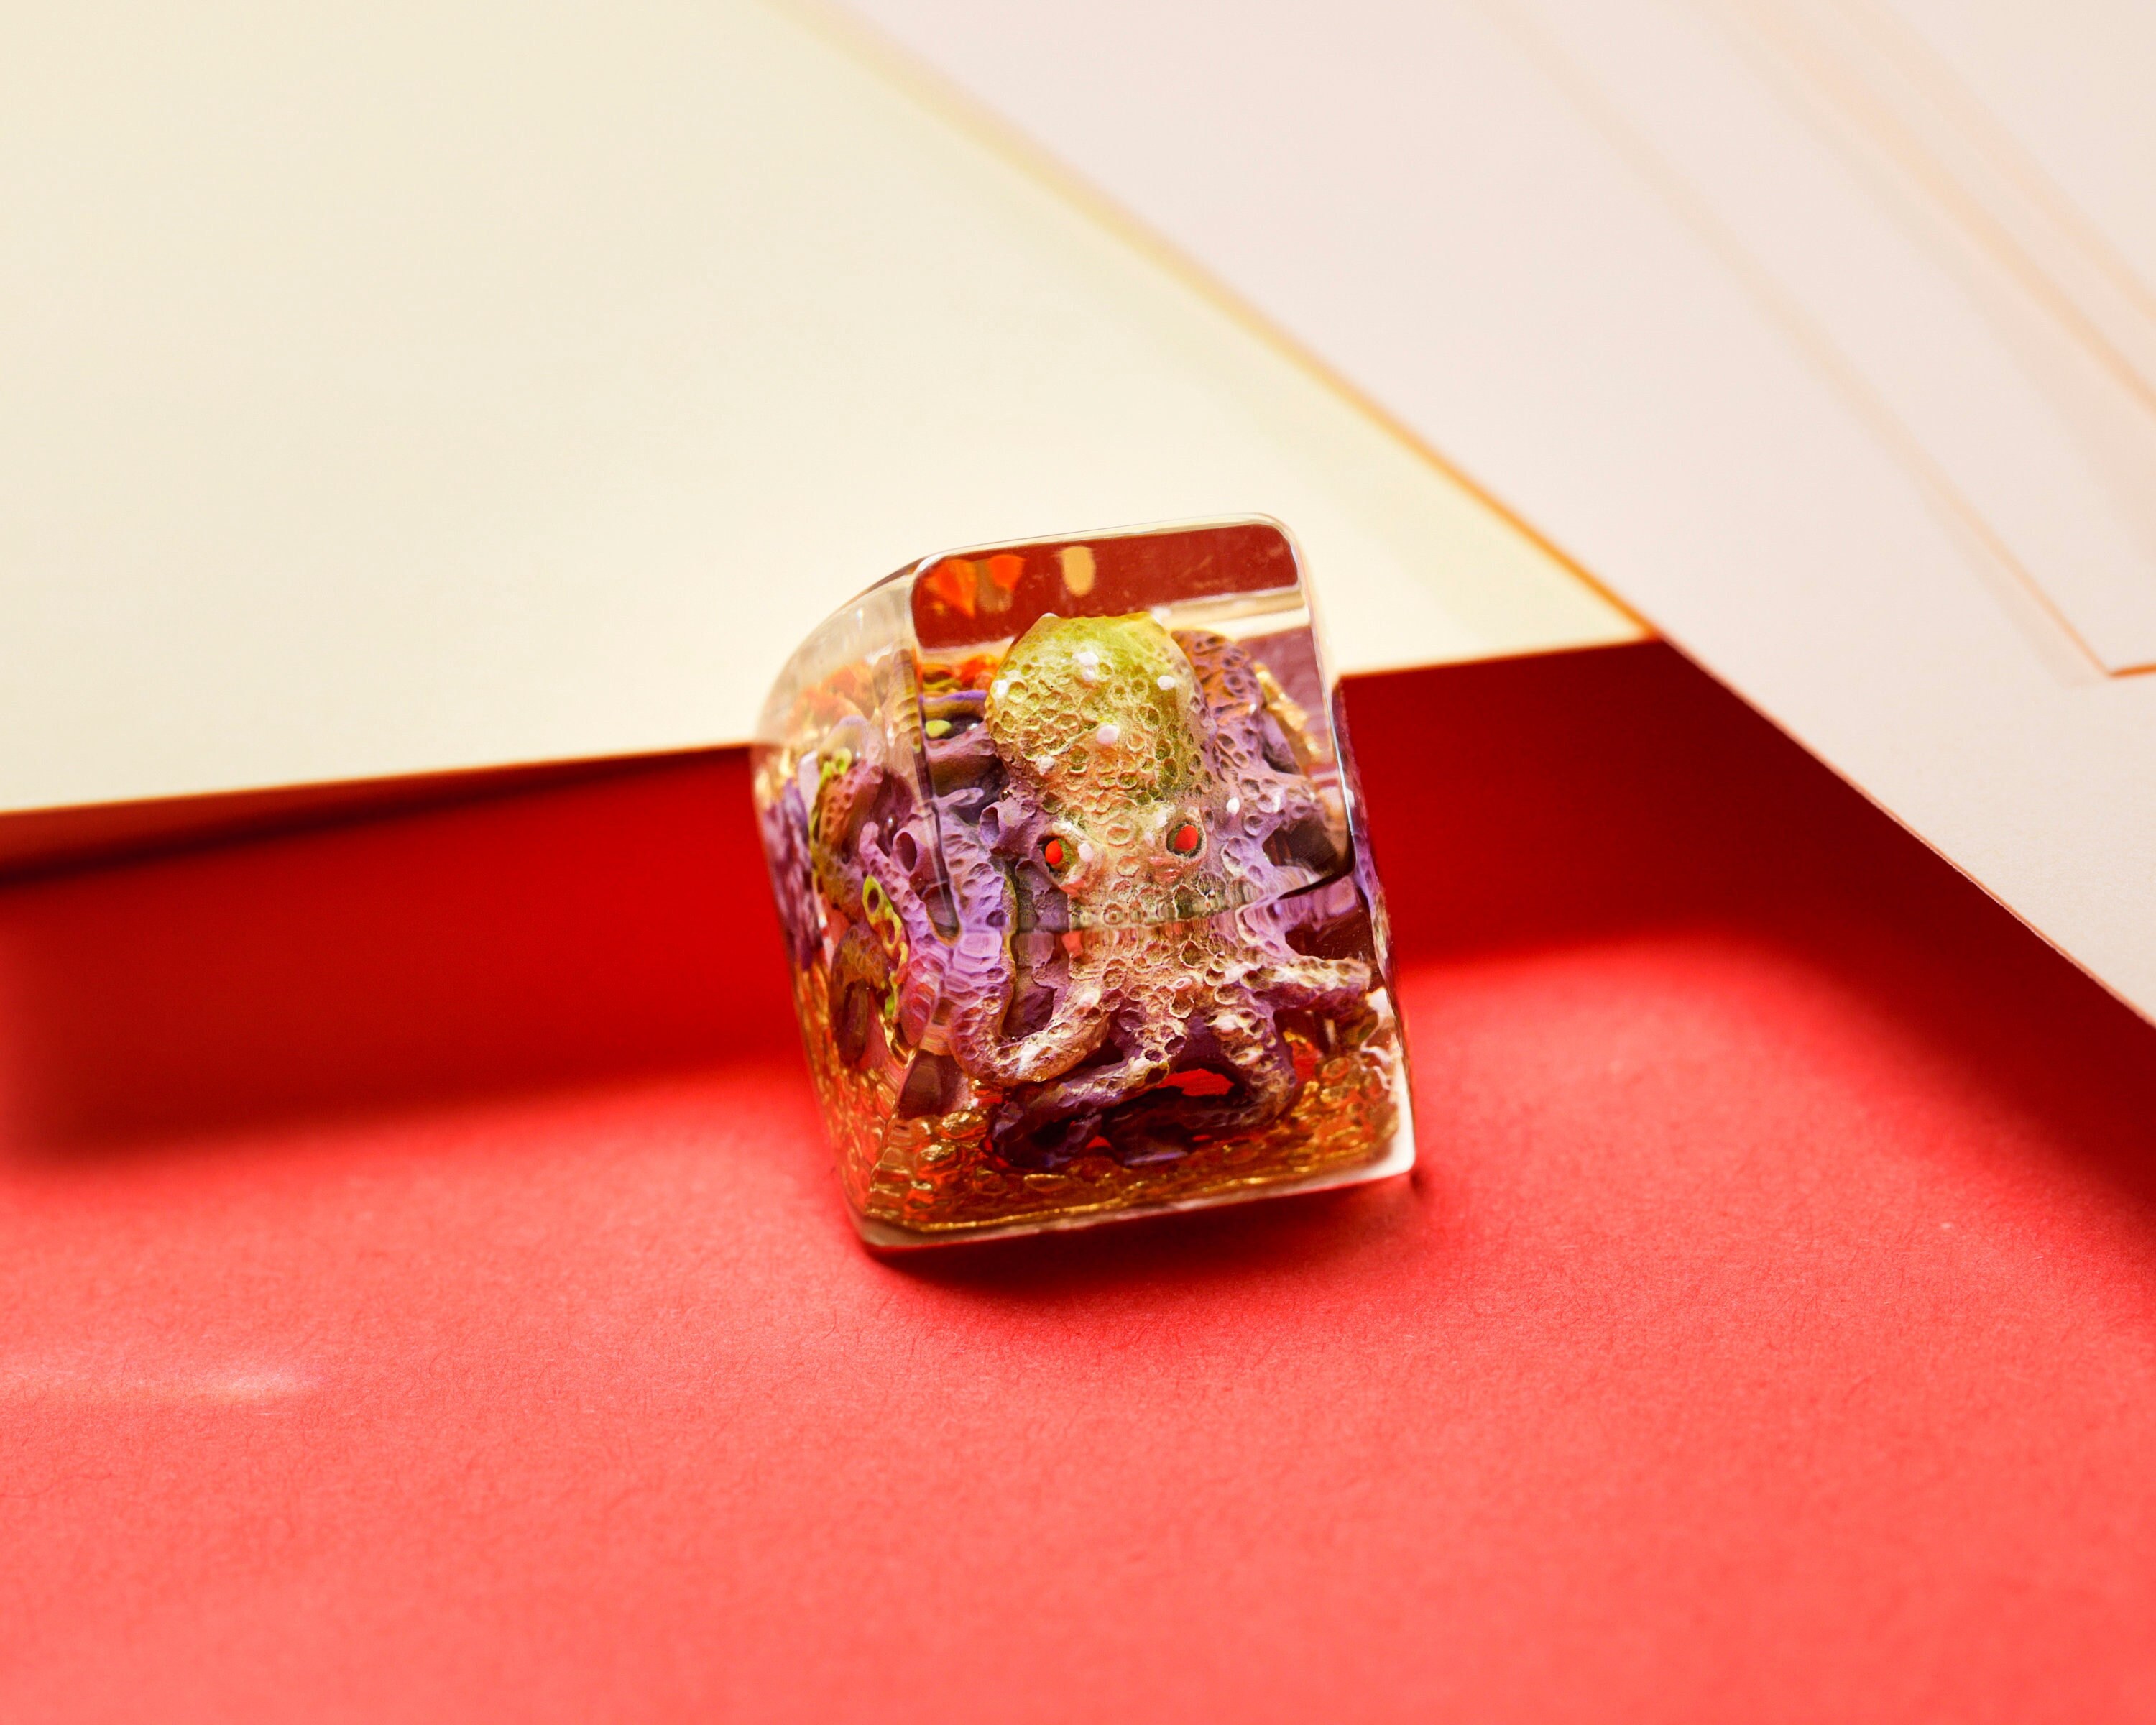 Artisan Keycap Purple Octopus Keycap For Cherry MX Switches Mechanical Keyboard Gift for him